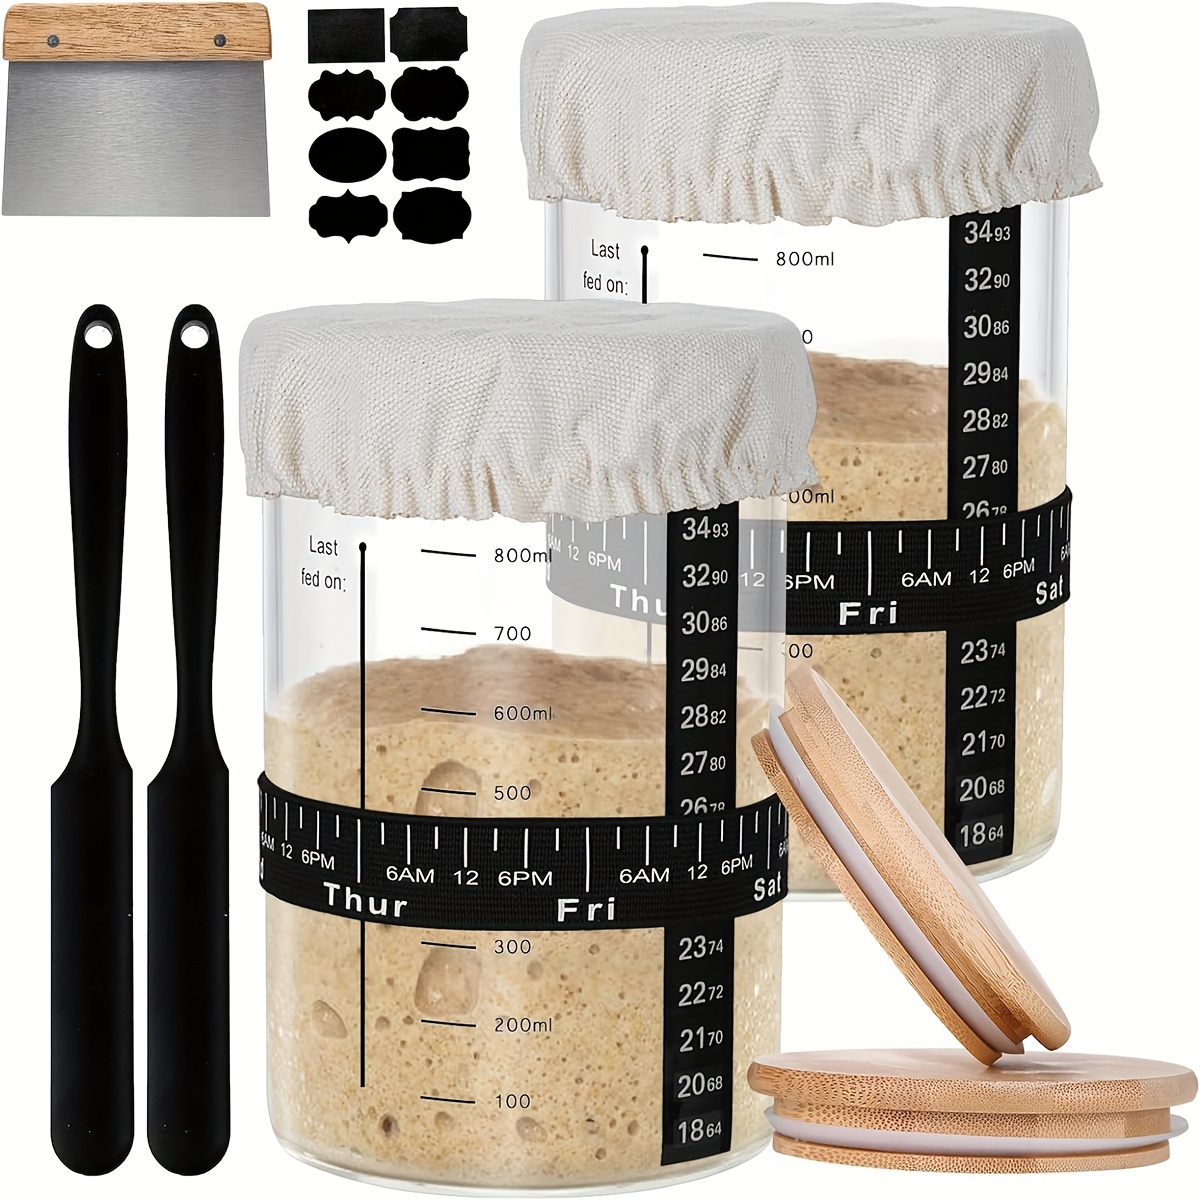 

Sourdough Starter Jar-1000ml/24oz, Bread Starter Kit 2 Pack With Silicone Scraper, Bread Scraper, Thermometer Strip, Date Marked Feeding Band, Cloth Cover And Wood Lid, Reusable For Diy Bread